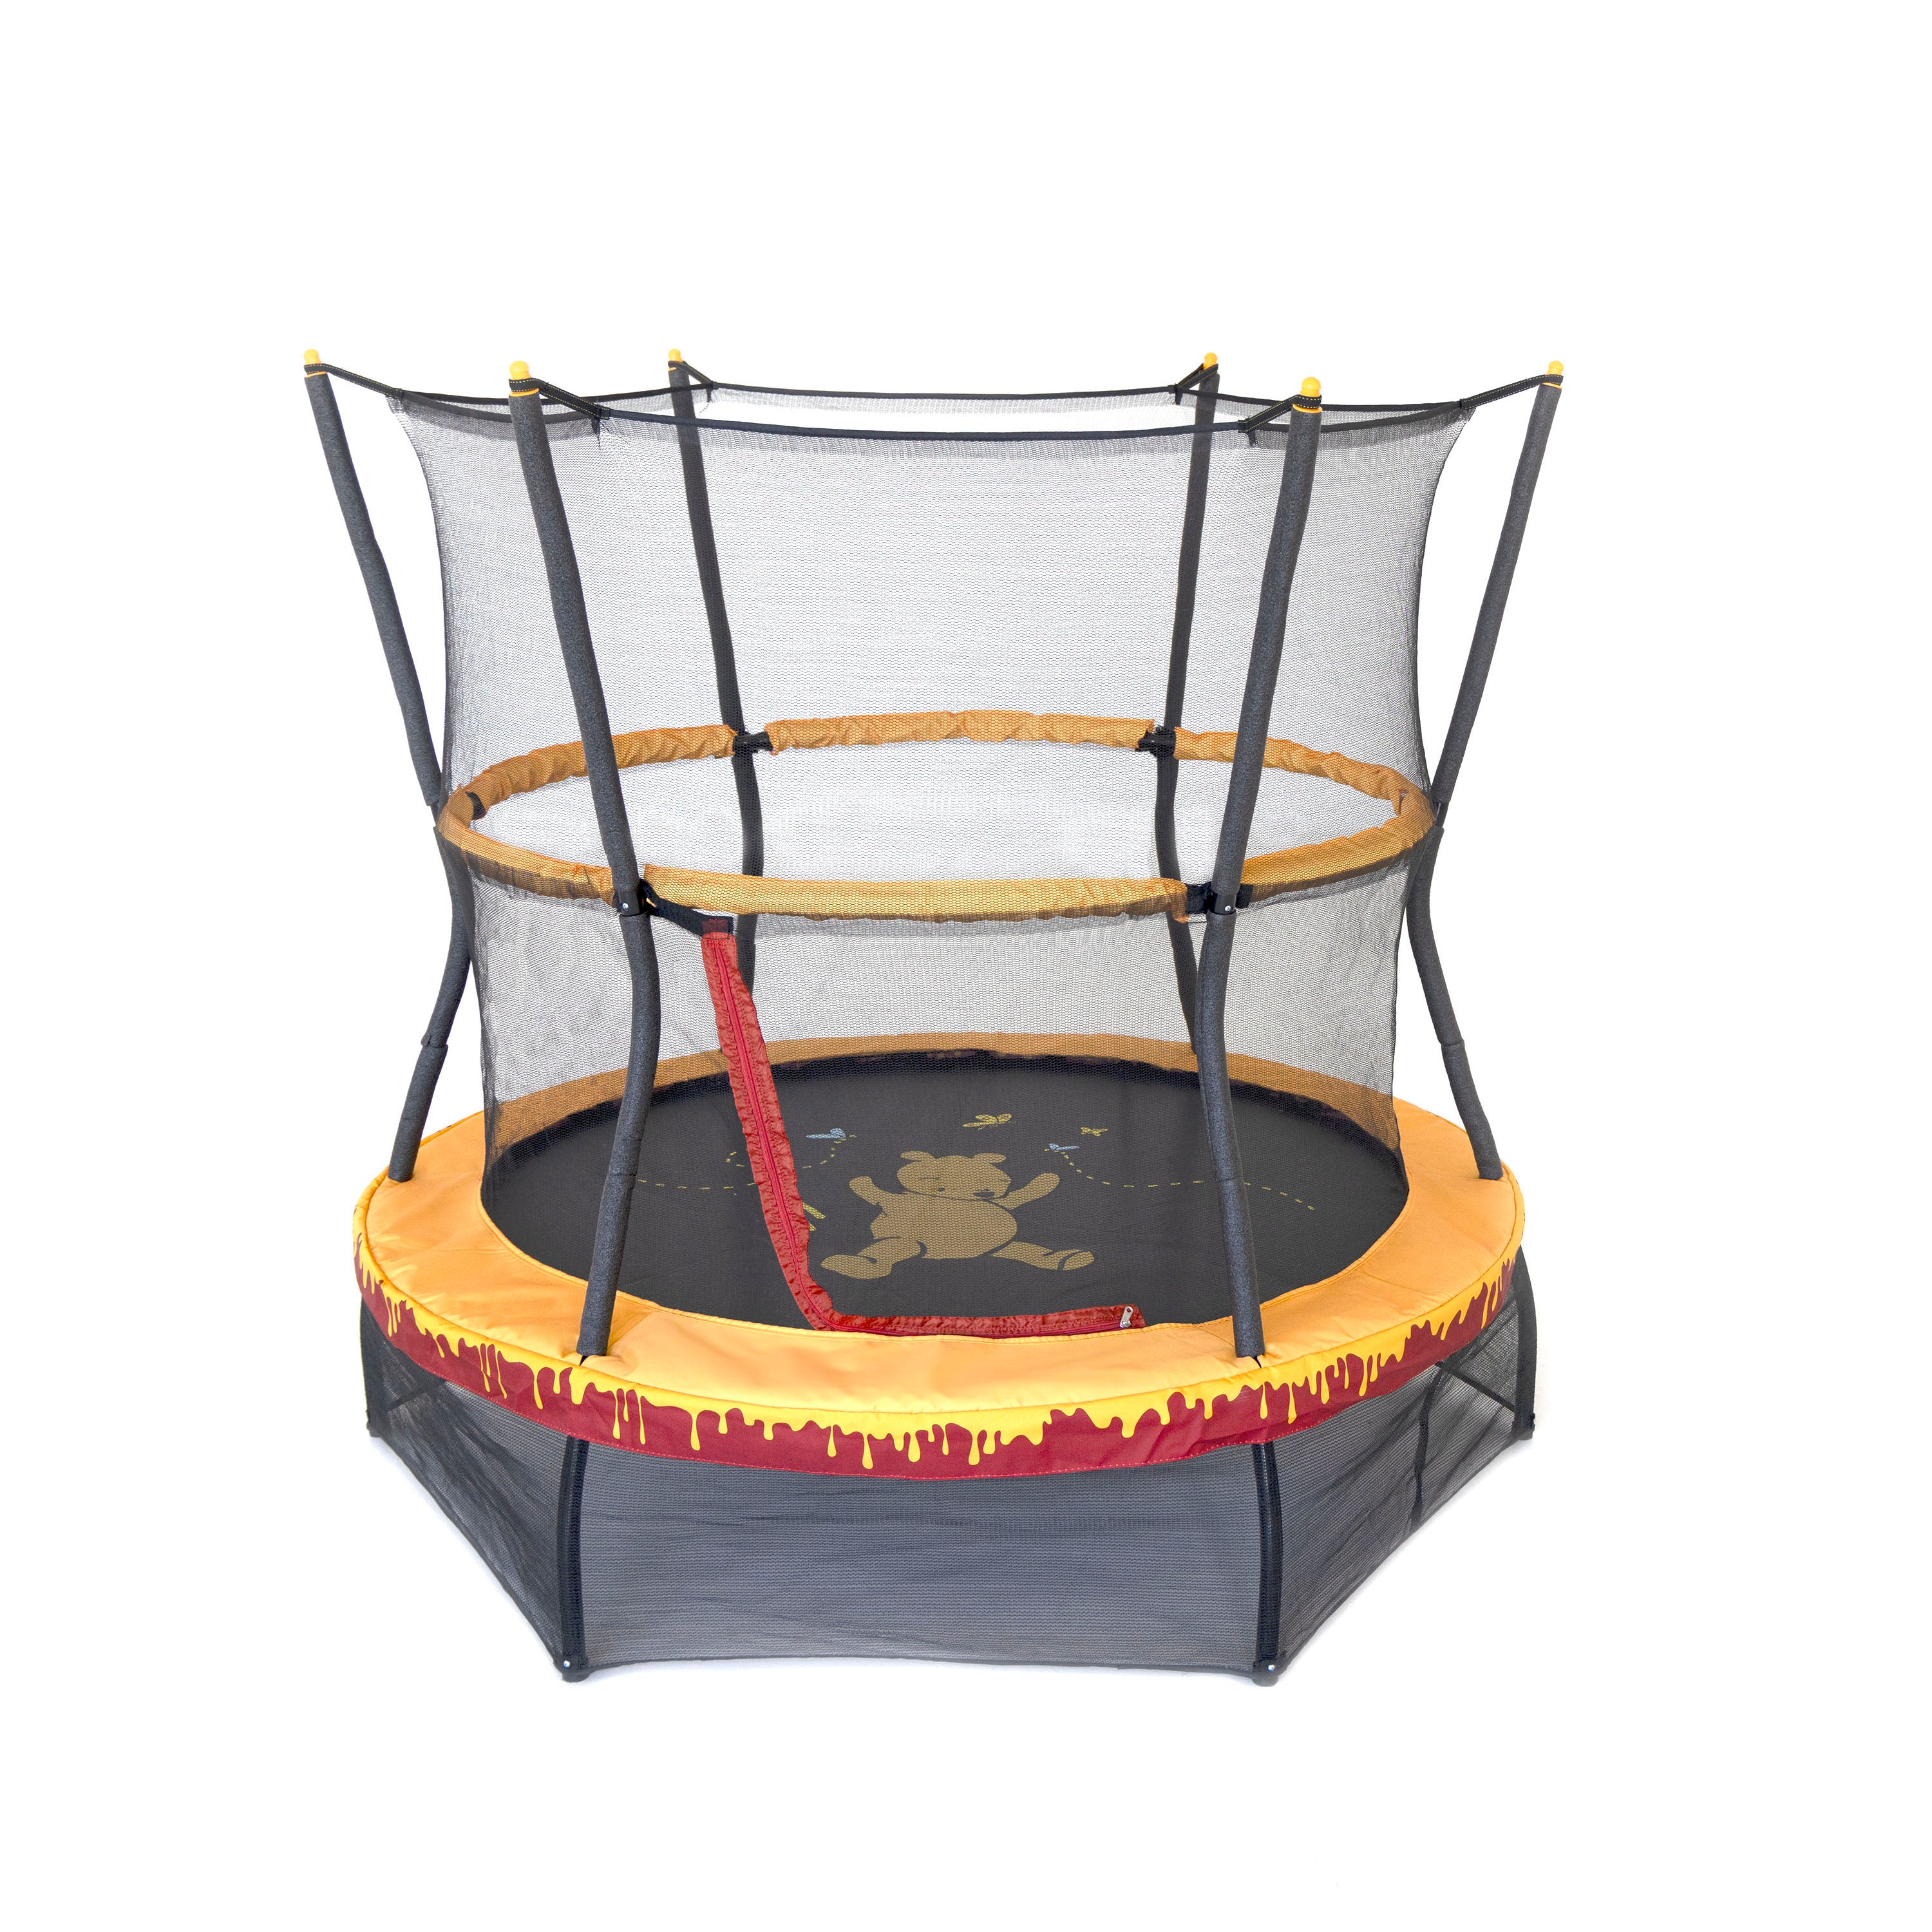 The 60-inch Winnie the Pooh mini trampoline features upper and lower enclosure nets, a red and yellow frame pad, a 360-degree handlebar, and a Winnie the Pooh jump mat design. 